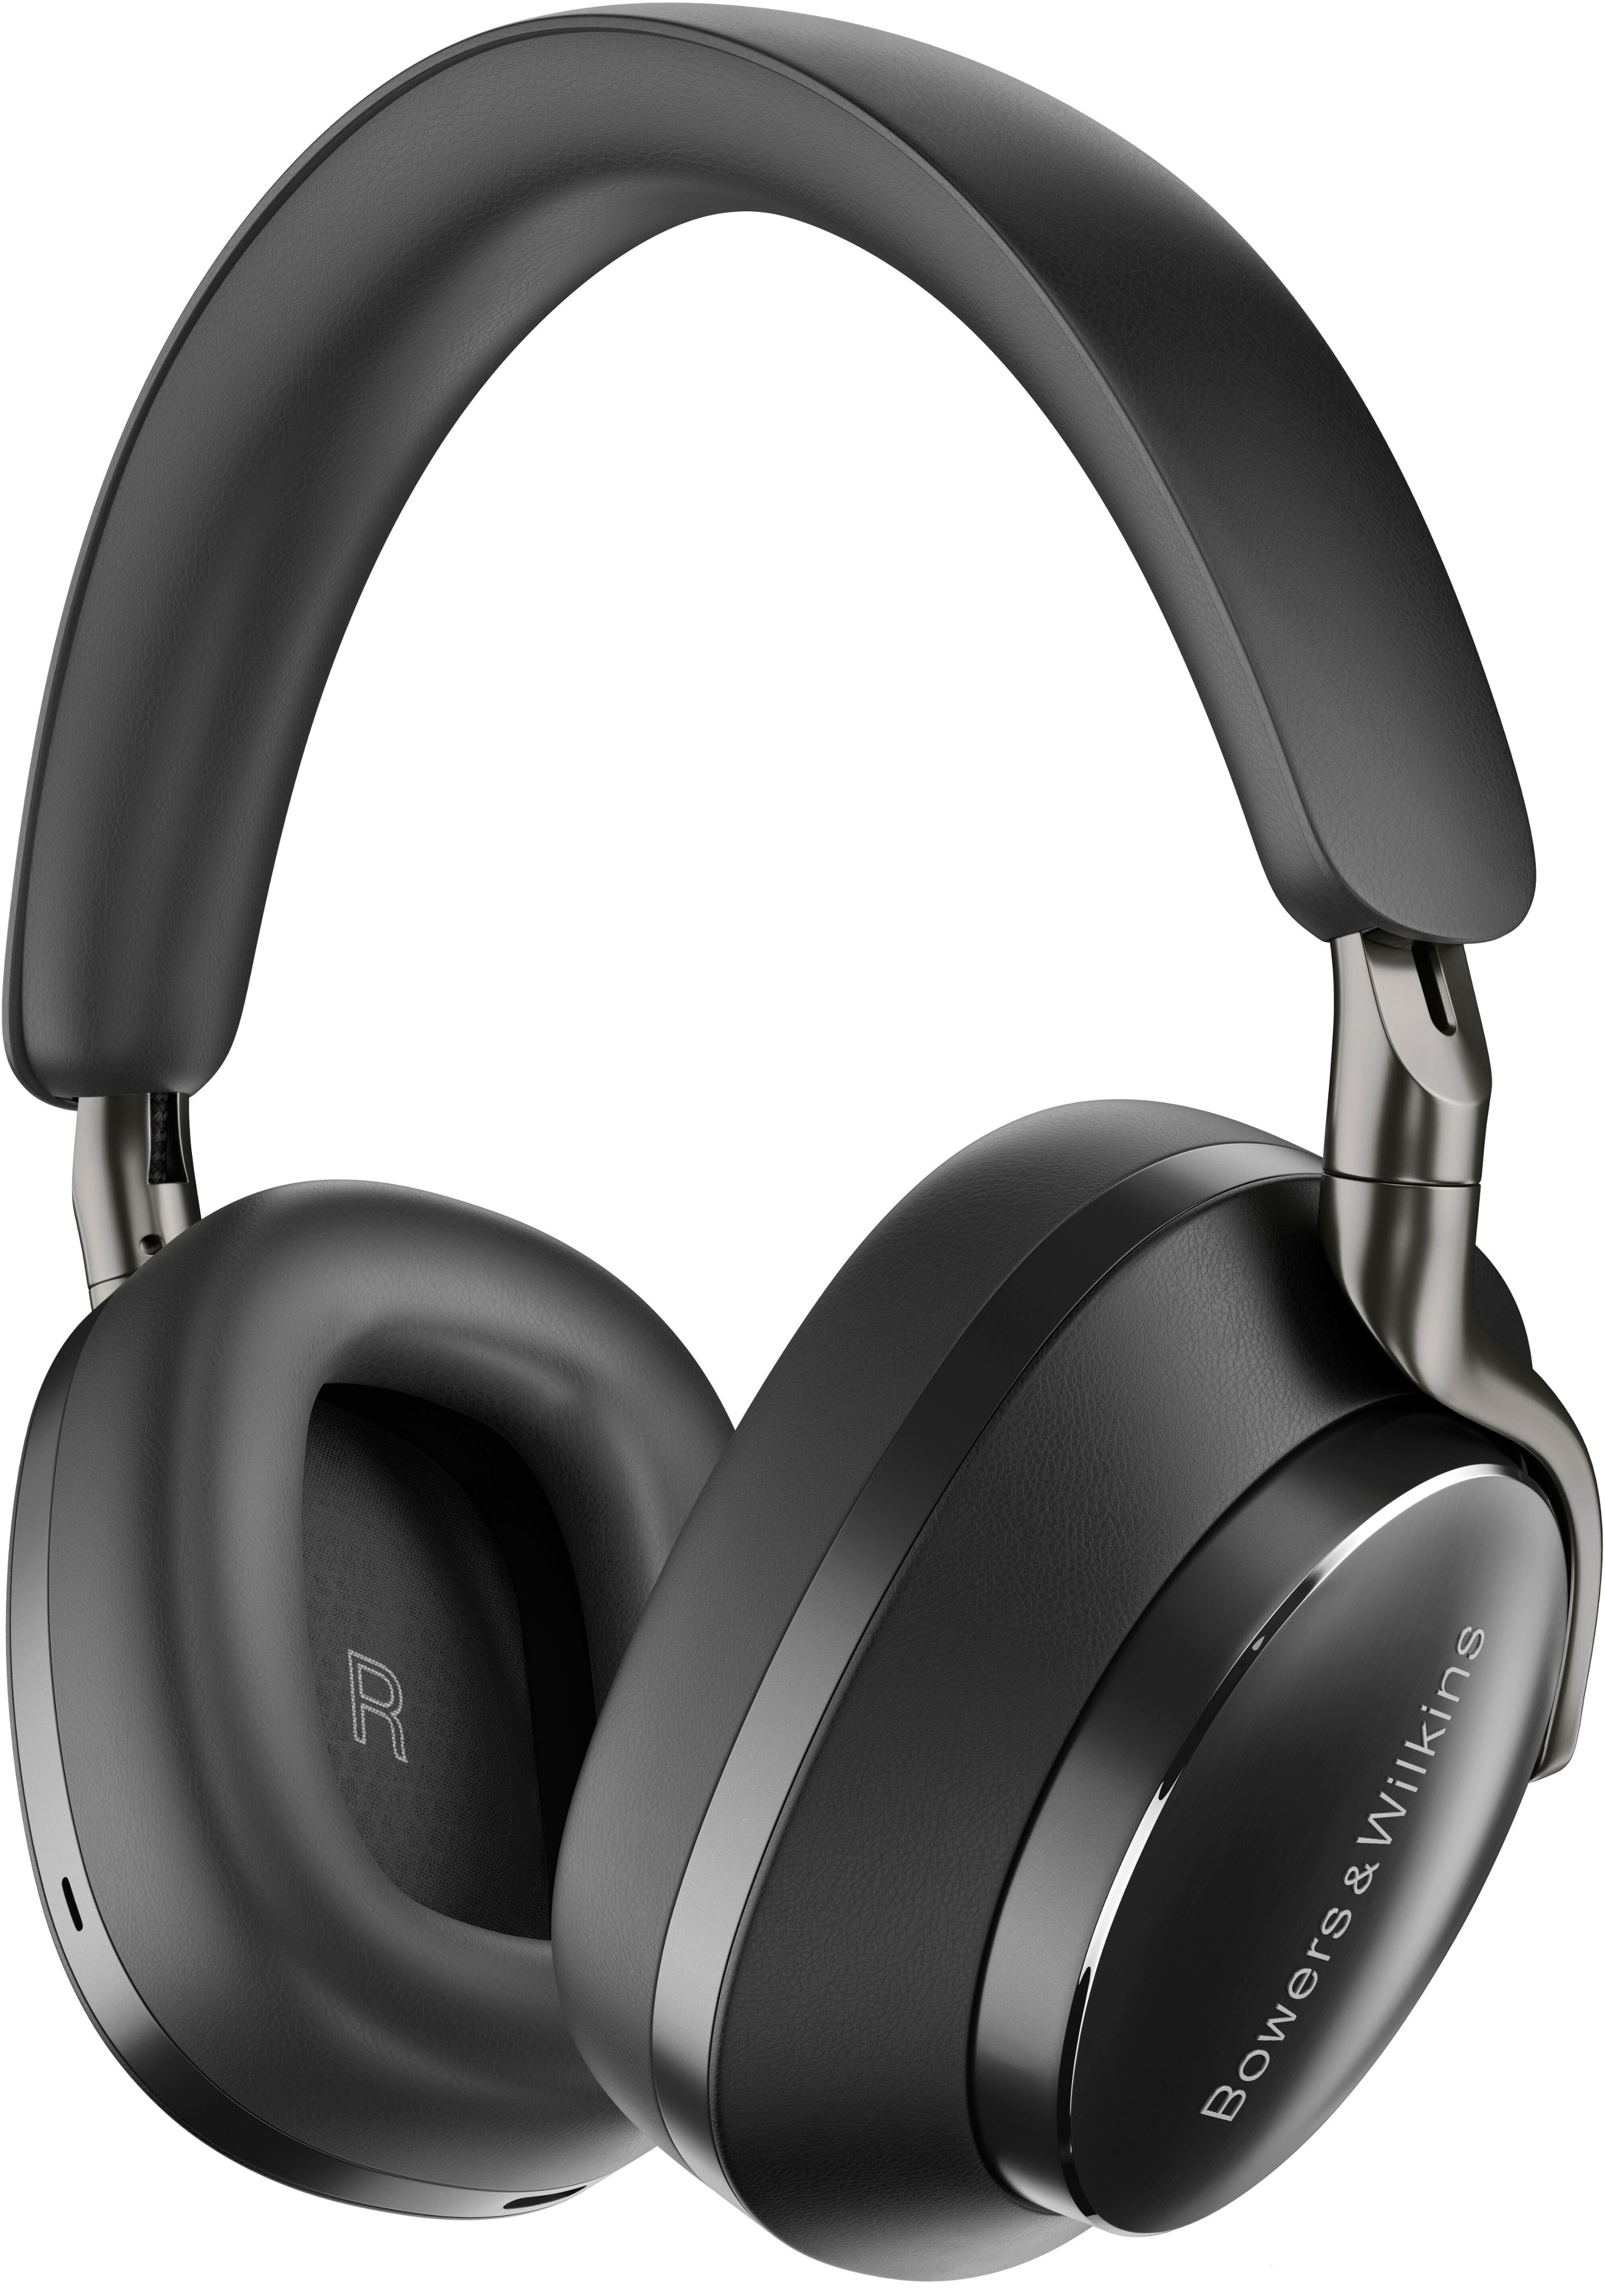  Bowers & Wilkins Px8 Over-Ear Wireless Headphones, Advanced  Active Noise Cancellation, Compatible with B&W Android/iOS Music App,  Premium Design, Offers 7-Hour Playback on 15-Min Quick Charge, Tan :  Electronics